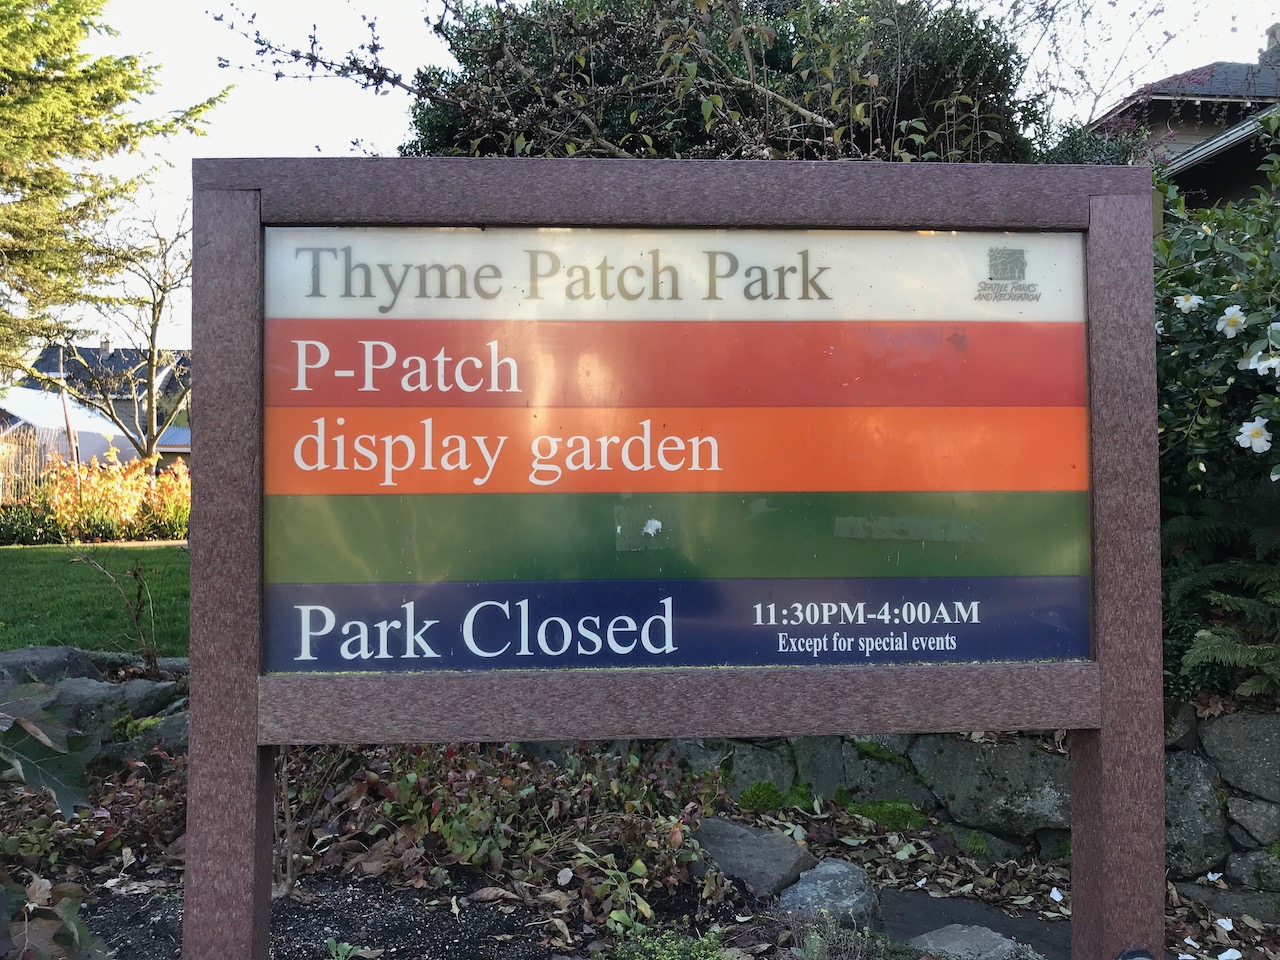 Thyme Patch Park, 2800 block of NW 58th St